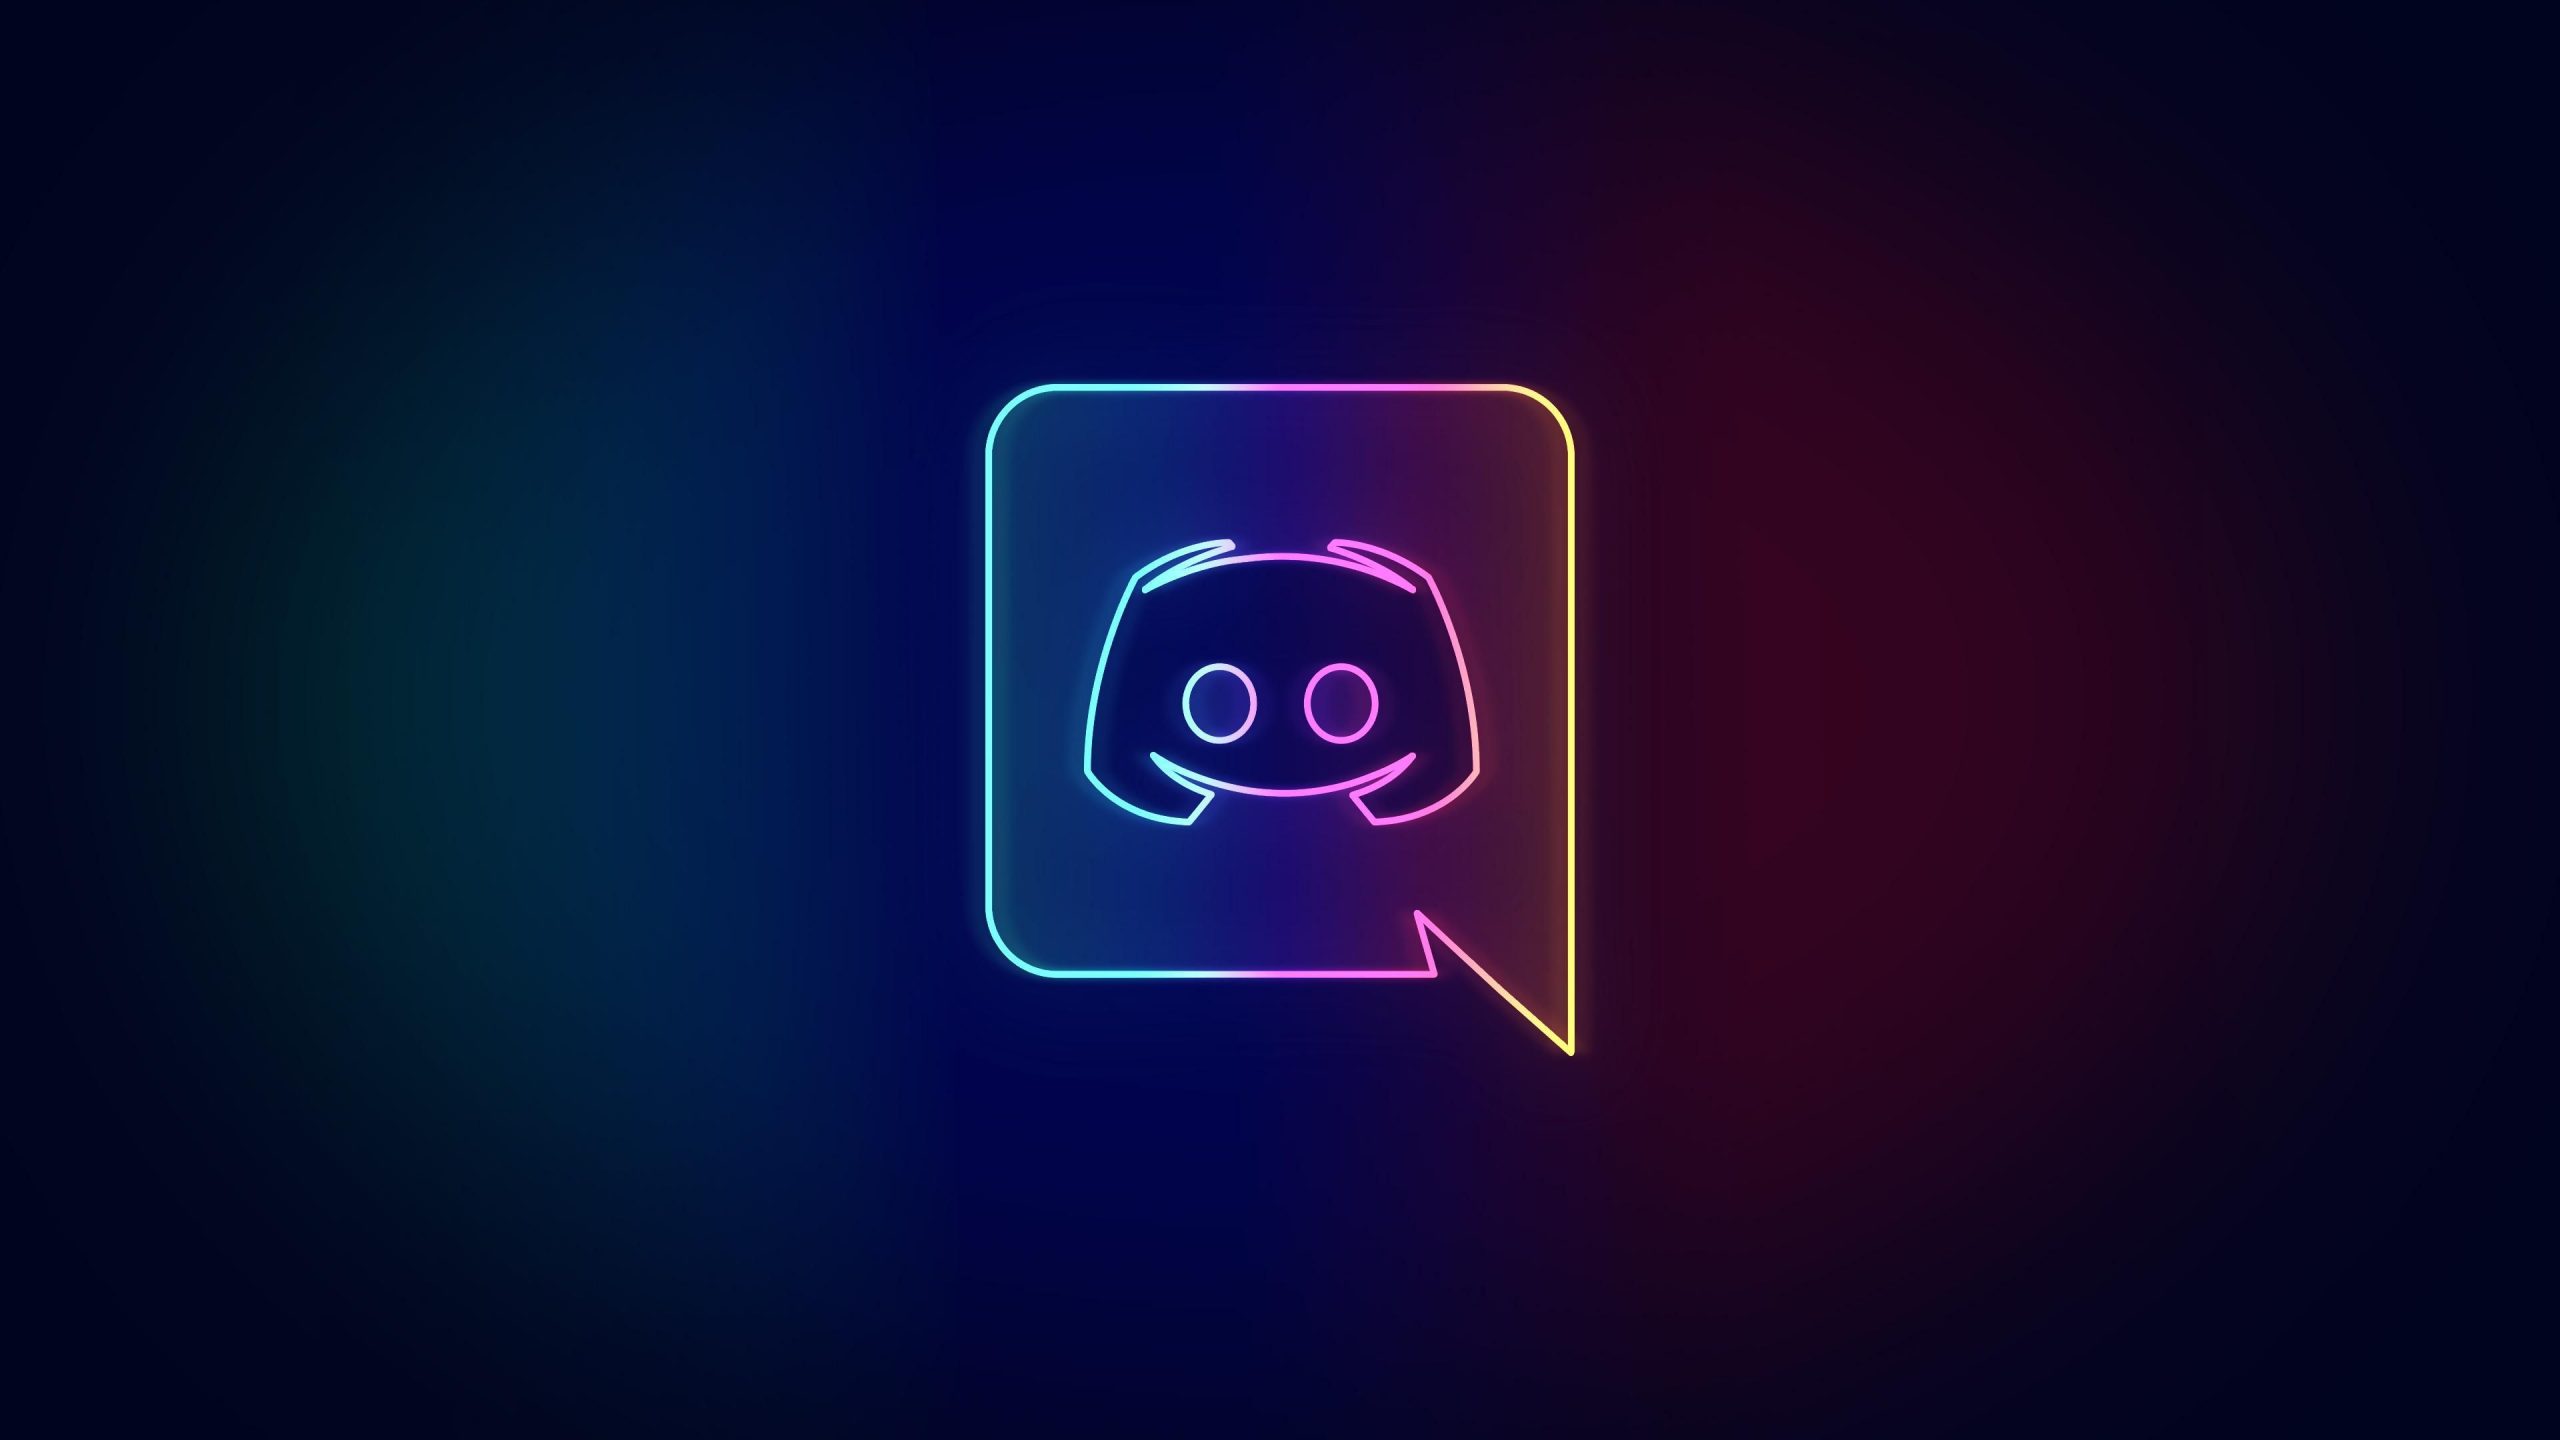 Trending discord bots to game up your server